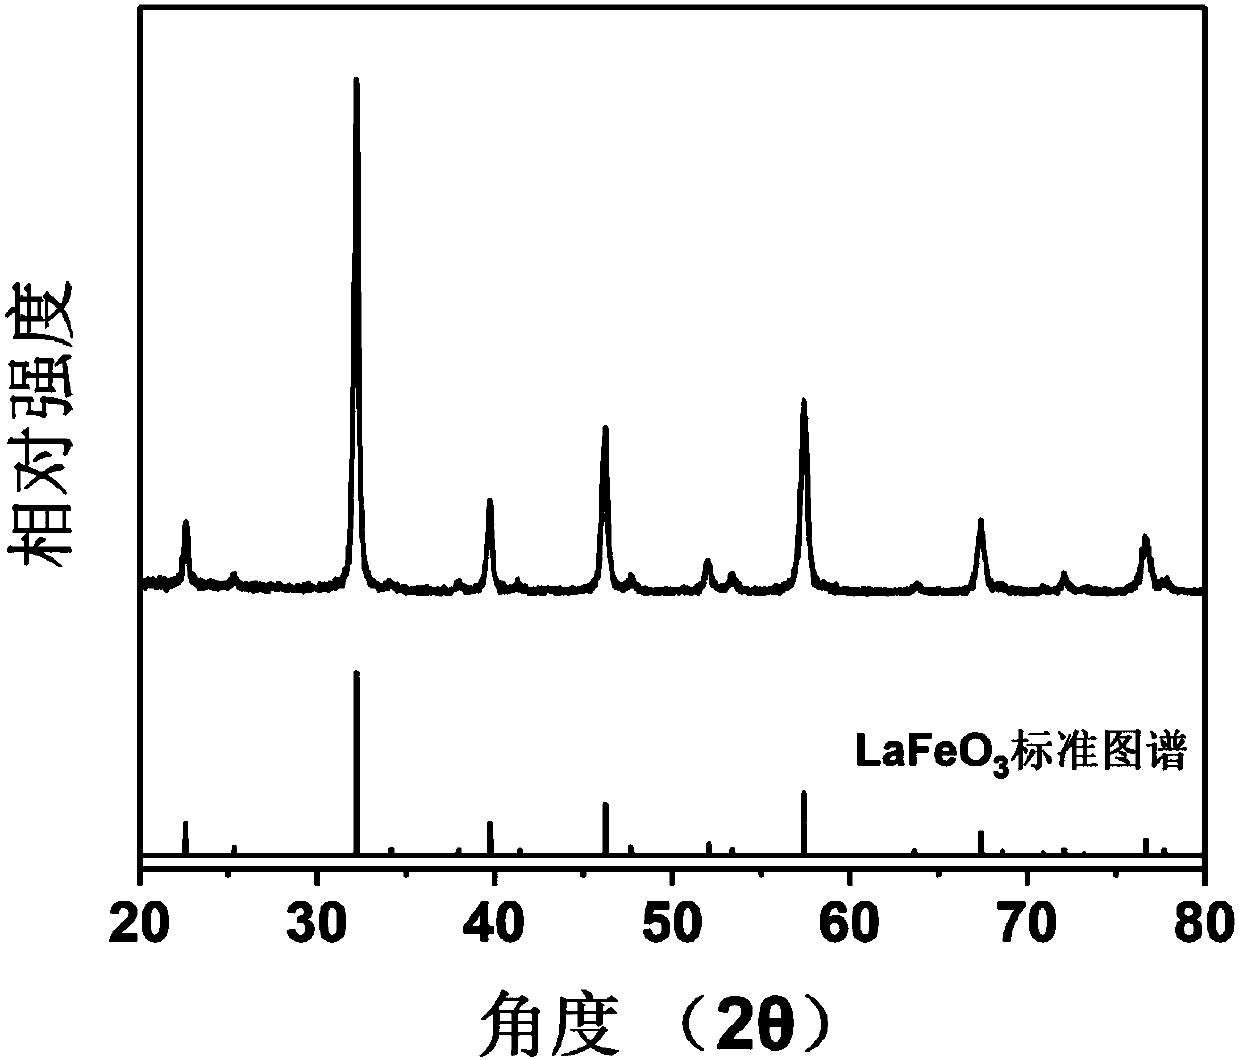 Acetone gas sensor of LaFeO3 nano sensitive material based on nuclear shell microsphere structure and its preparation method